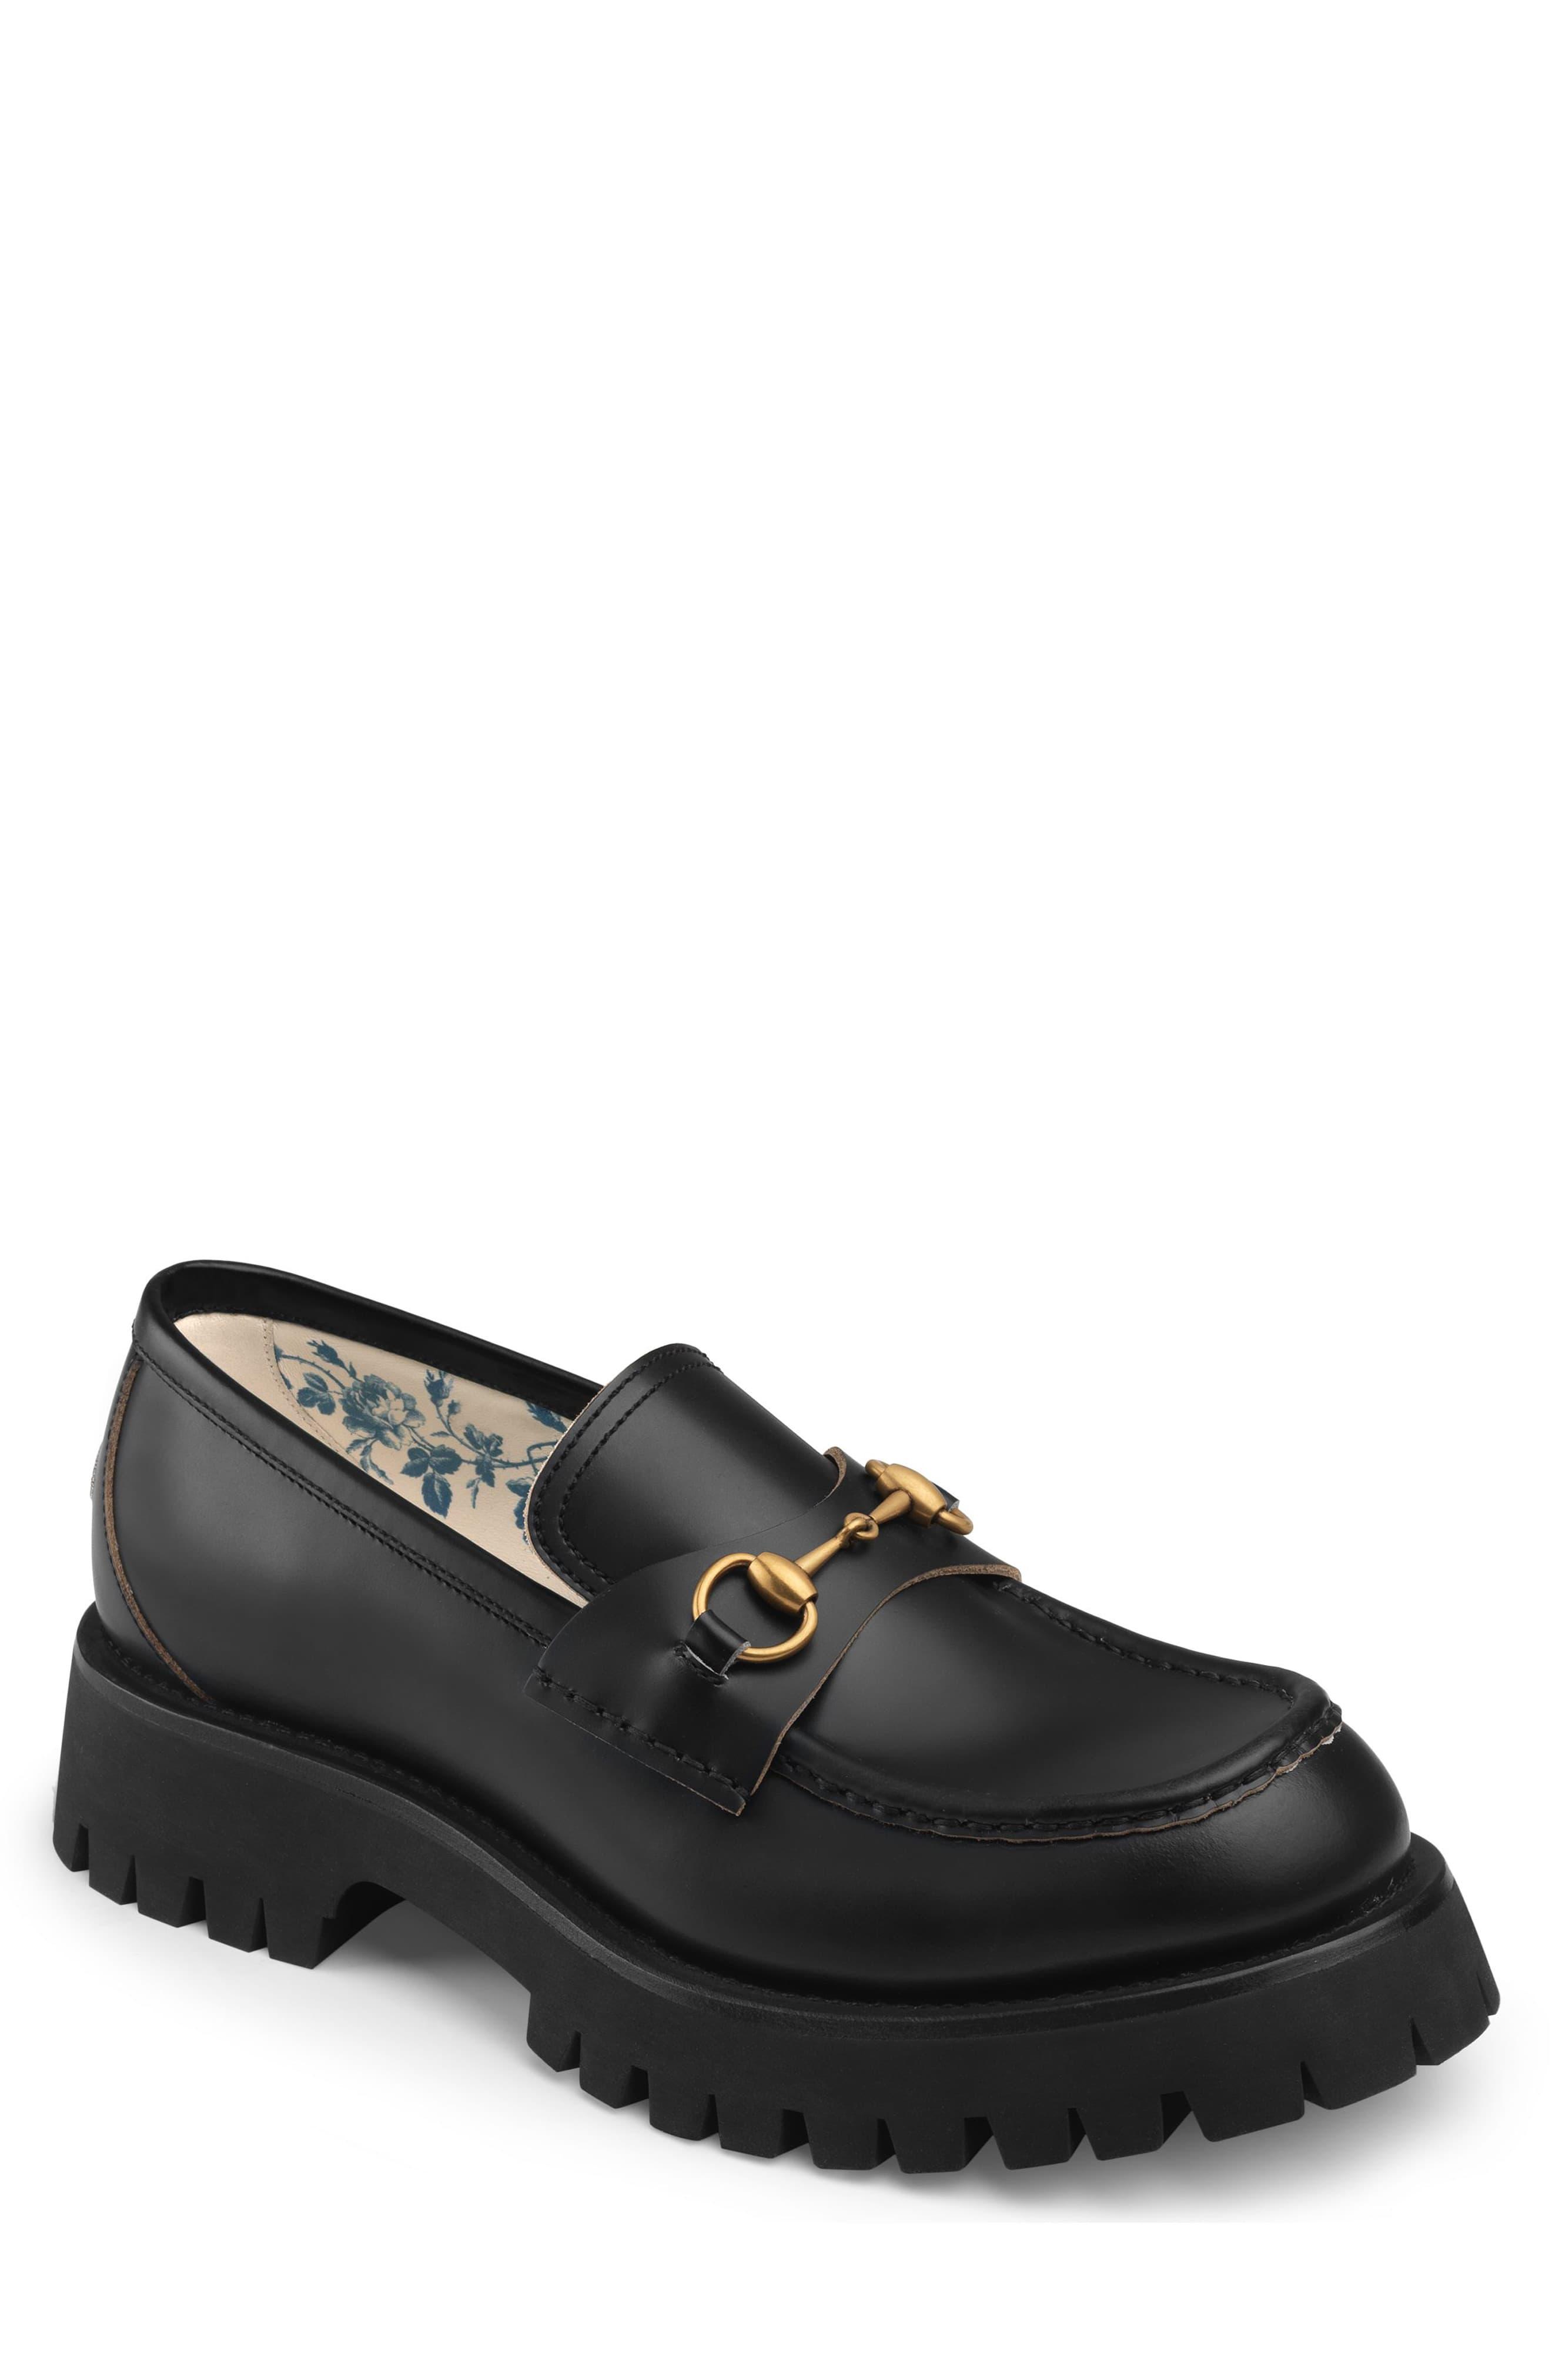 Gucci Leather Loafers With Horsebit And Lug Sole in Black for Men - Lyst